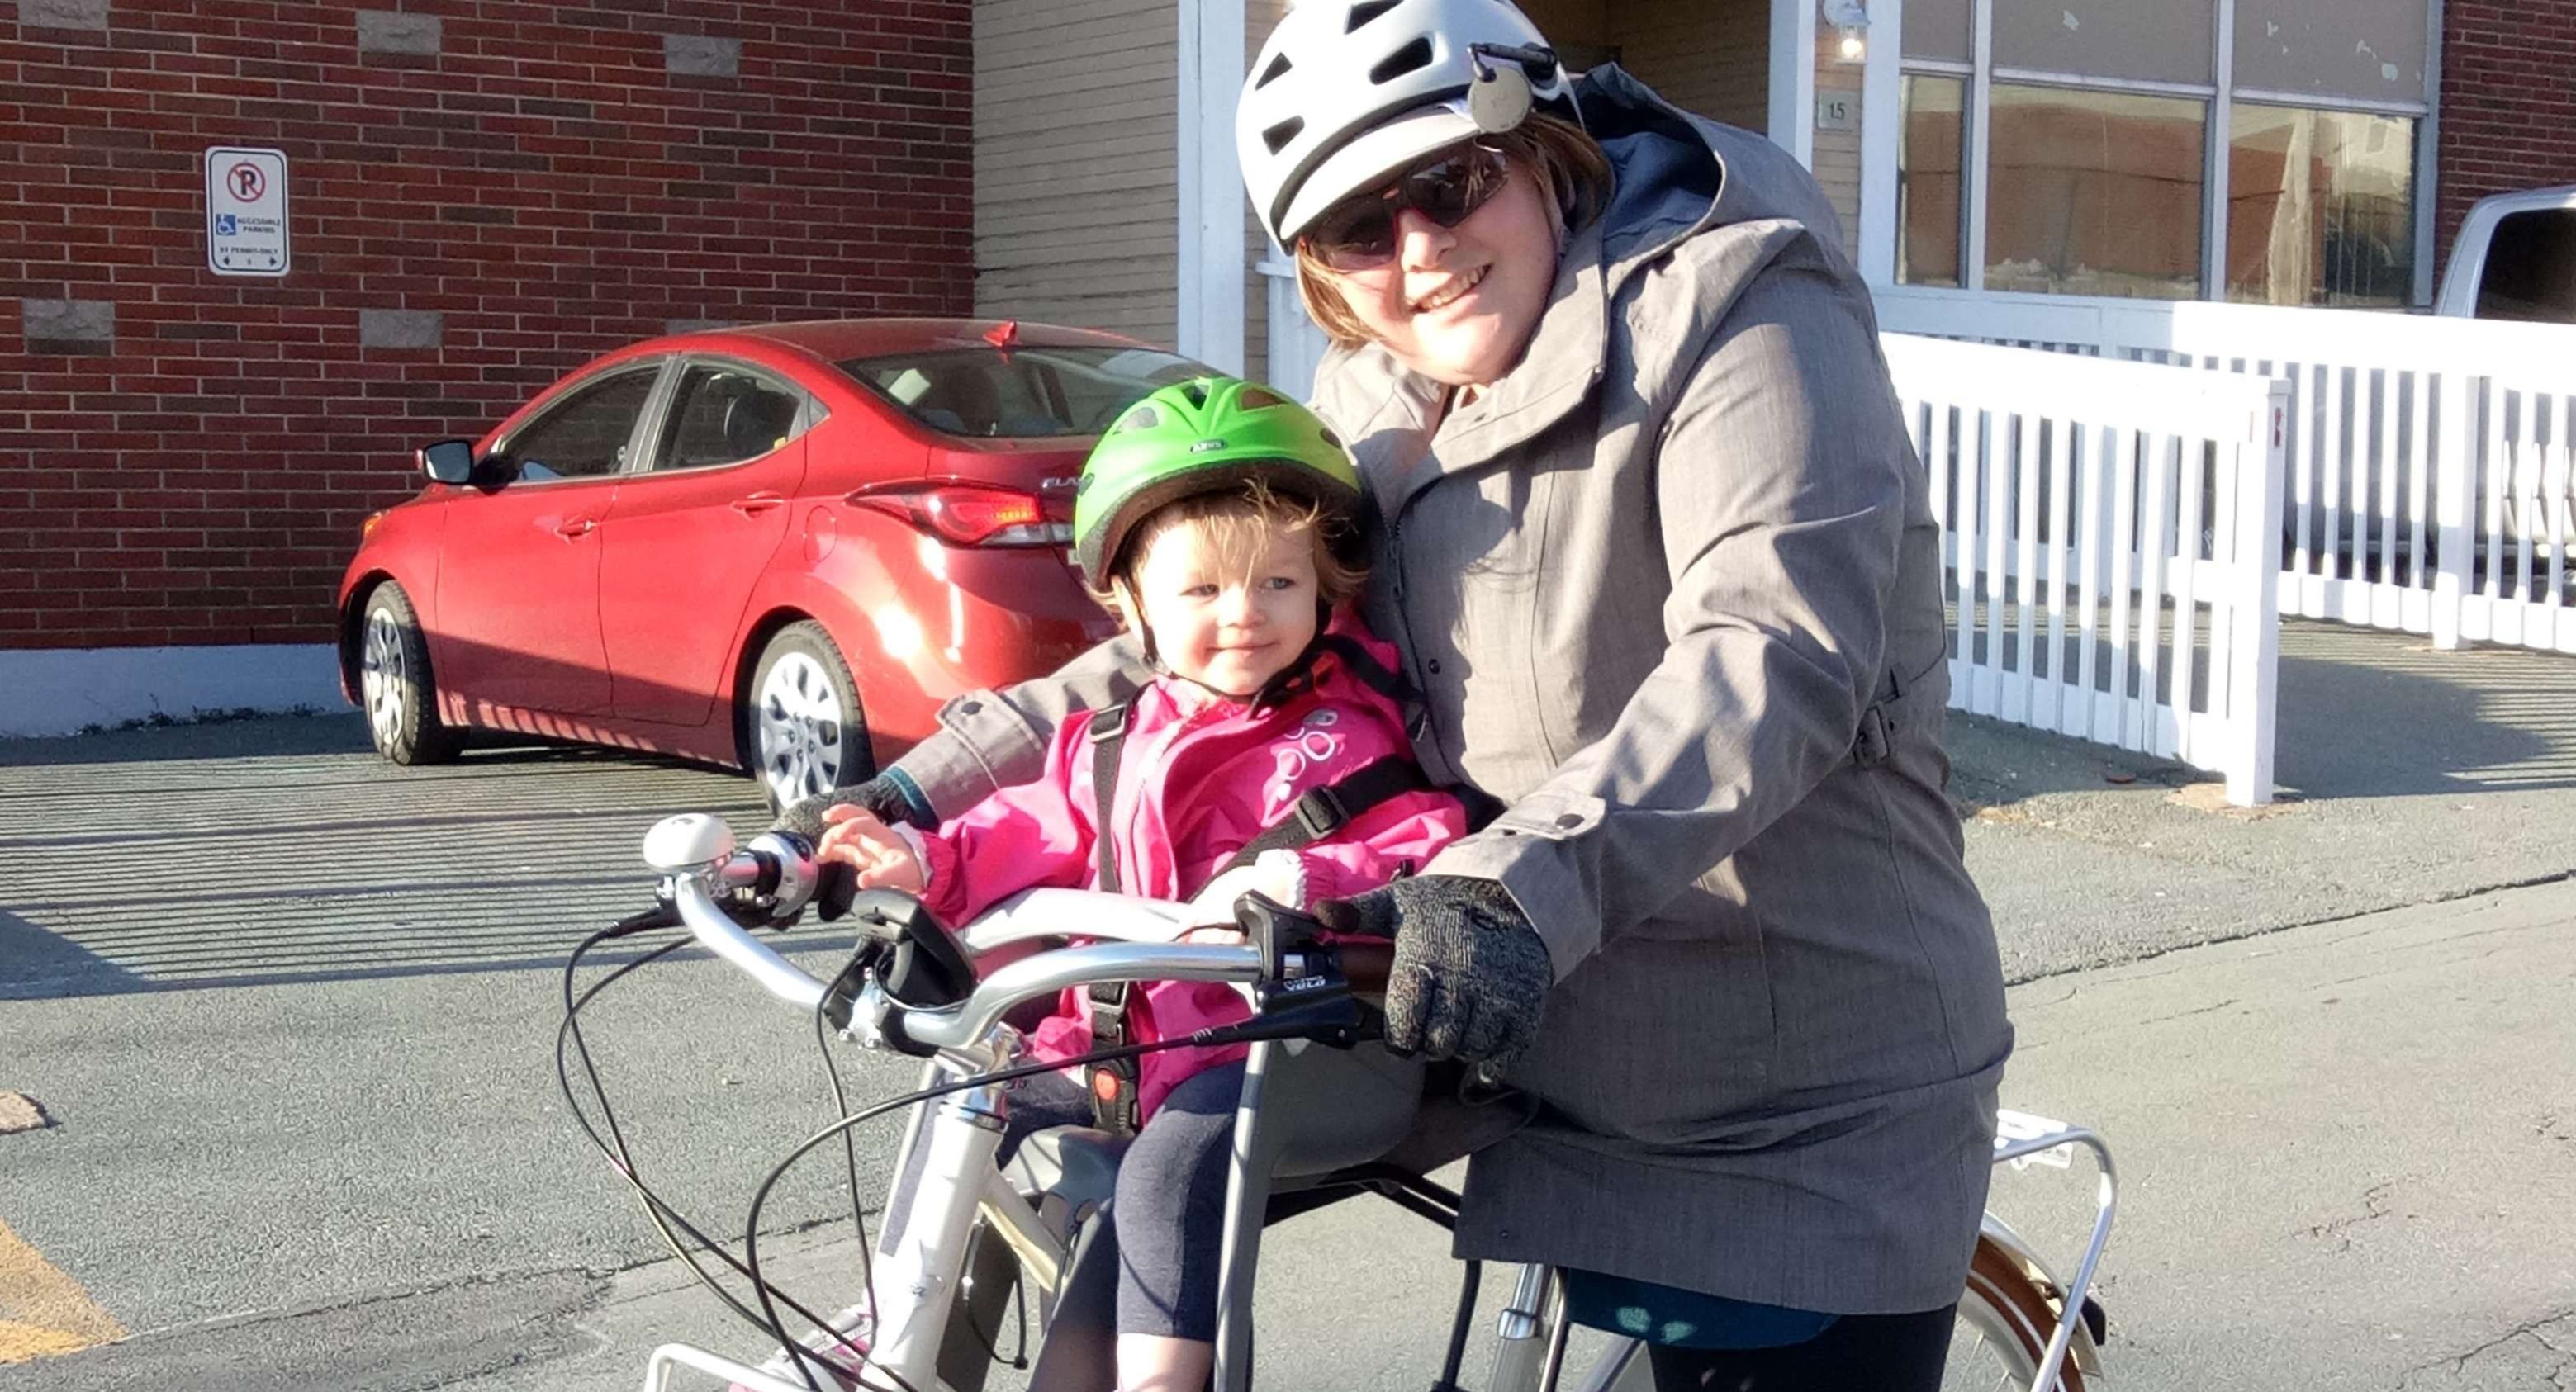 Jenna and her daughter on a bike